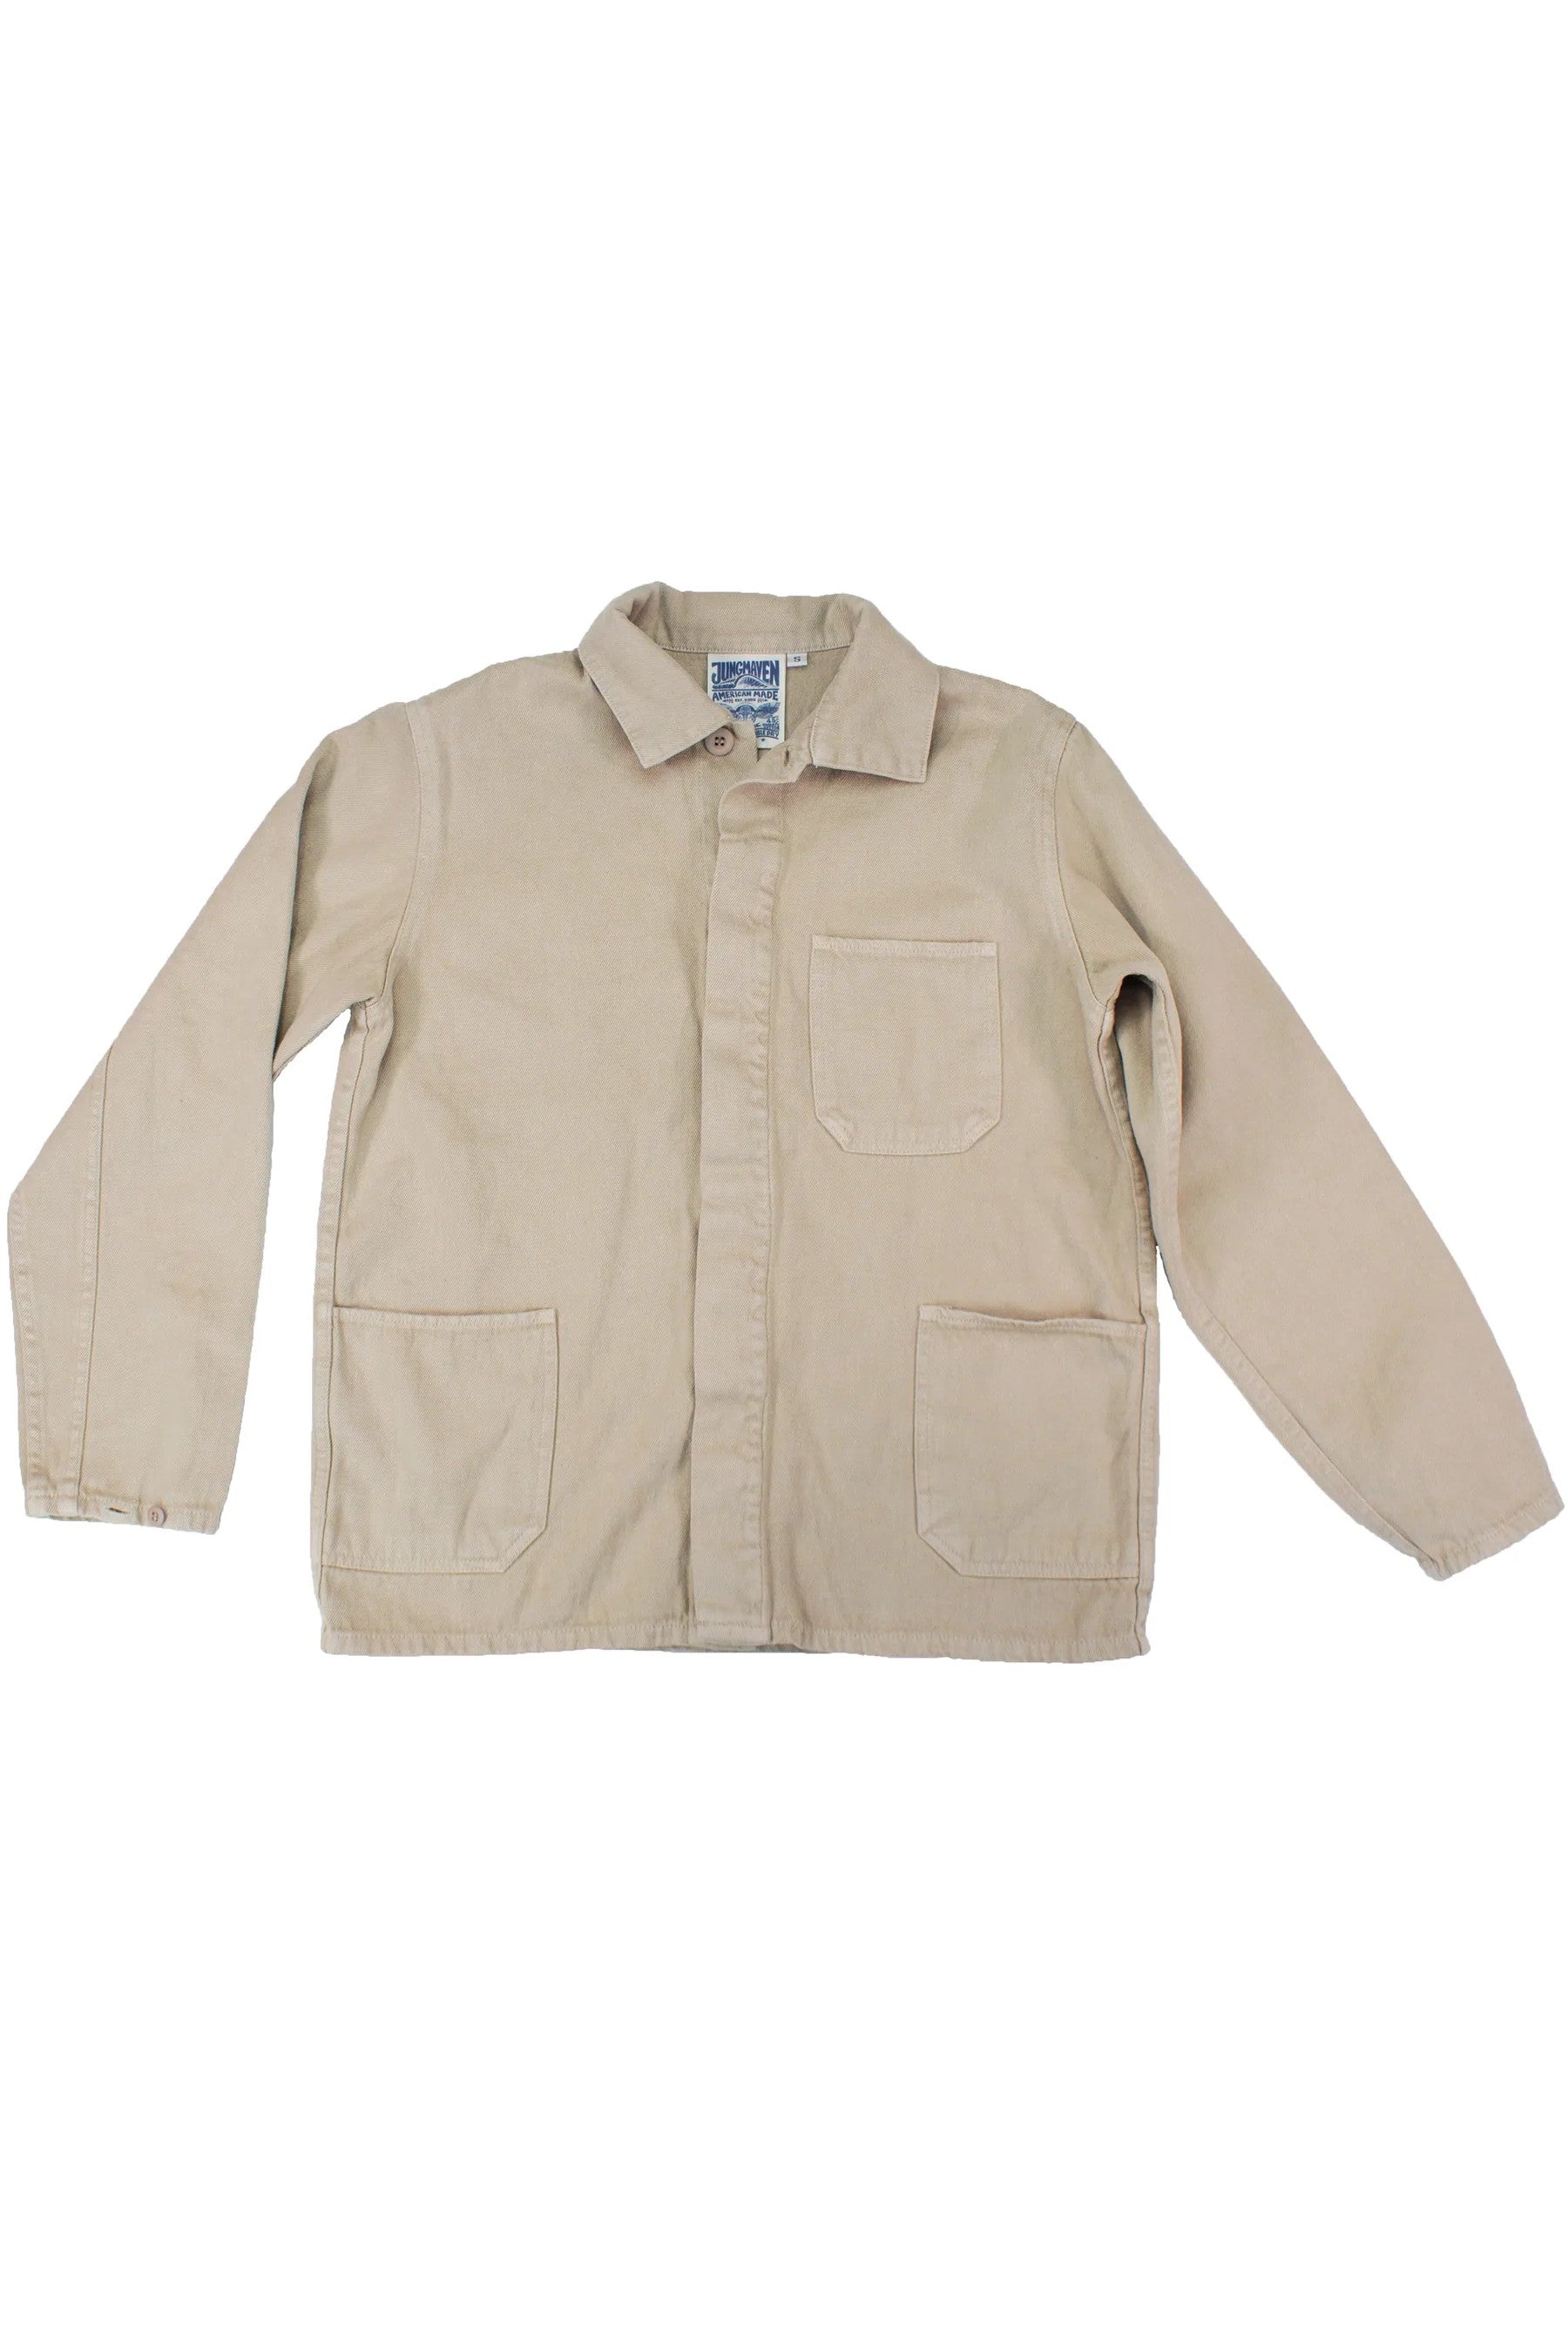 JUNGMAVEN SUSTAINABLE CLOTHING MADE IN USA Hemp and Organic Cotton Unisex Chore Coat Garment Dyed Off White Canvas